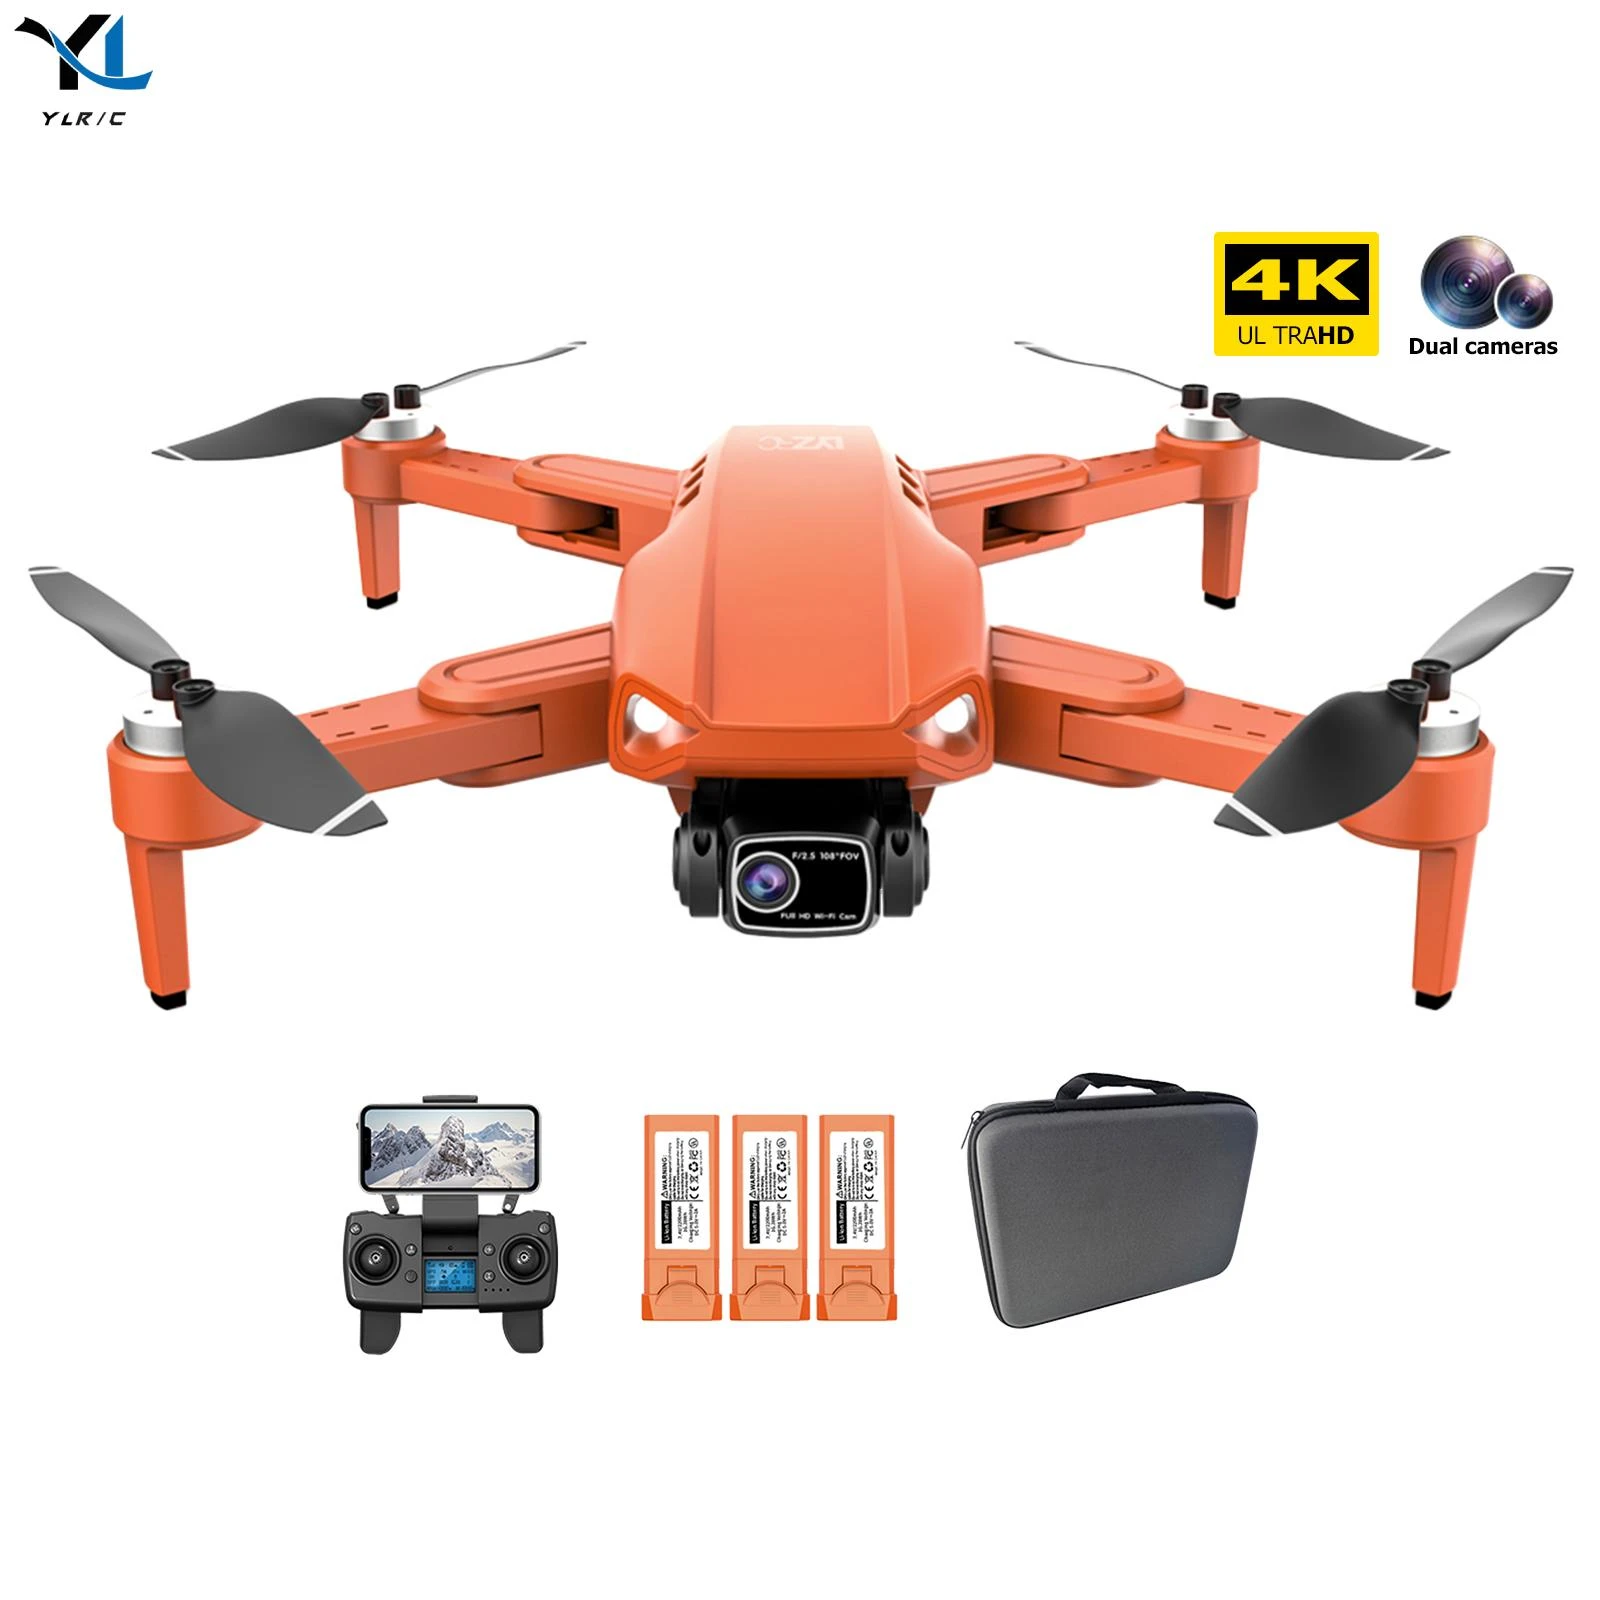 L900 PRO SE Drone 4K 5G WiFi GPS Dual HD Brushless Camera Drone With Visual Obstacle Avoidance RC Quadcopter VS KF101 dji phantom 3 advanced remote